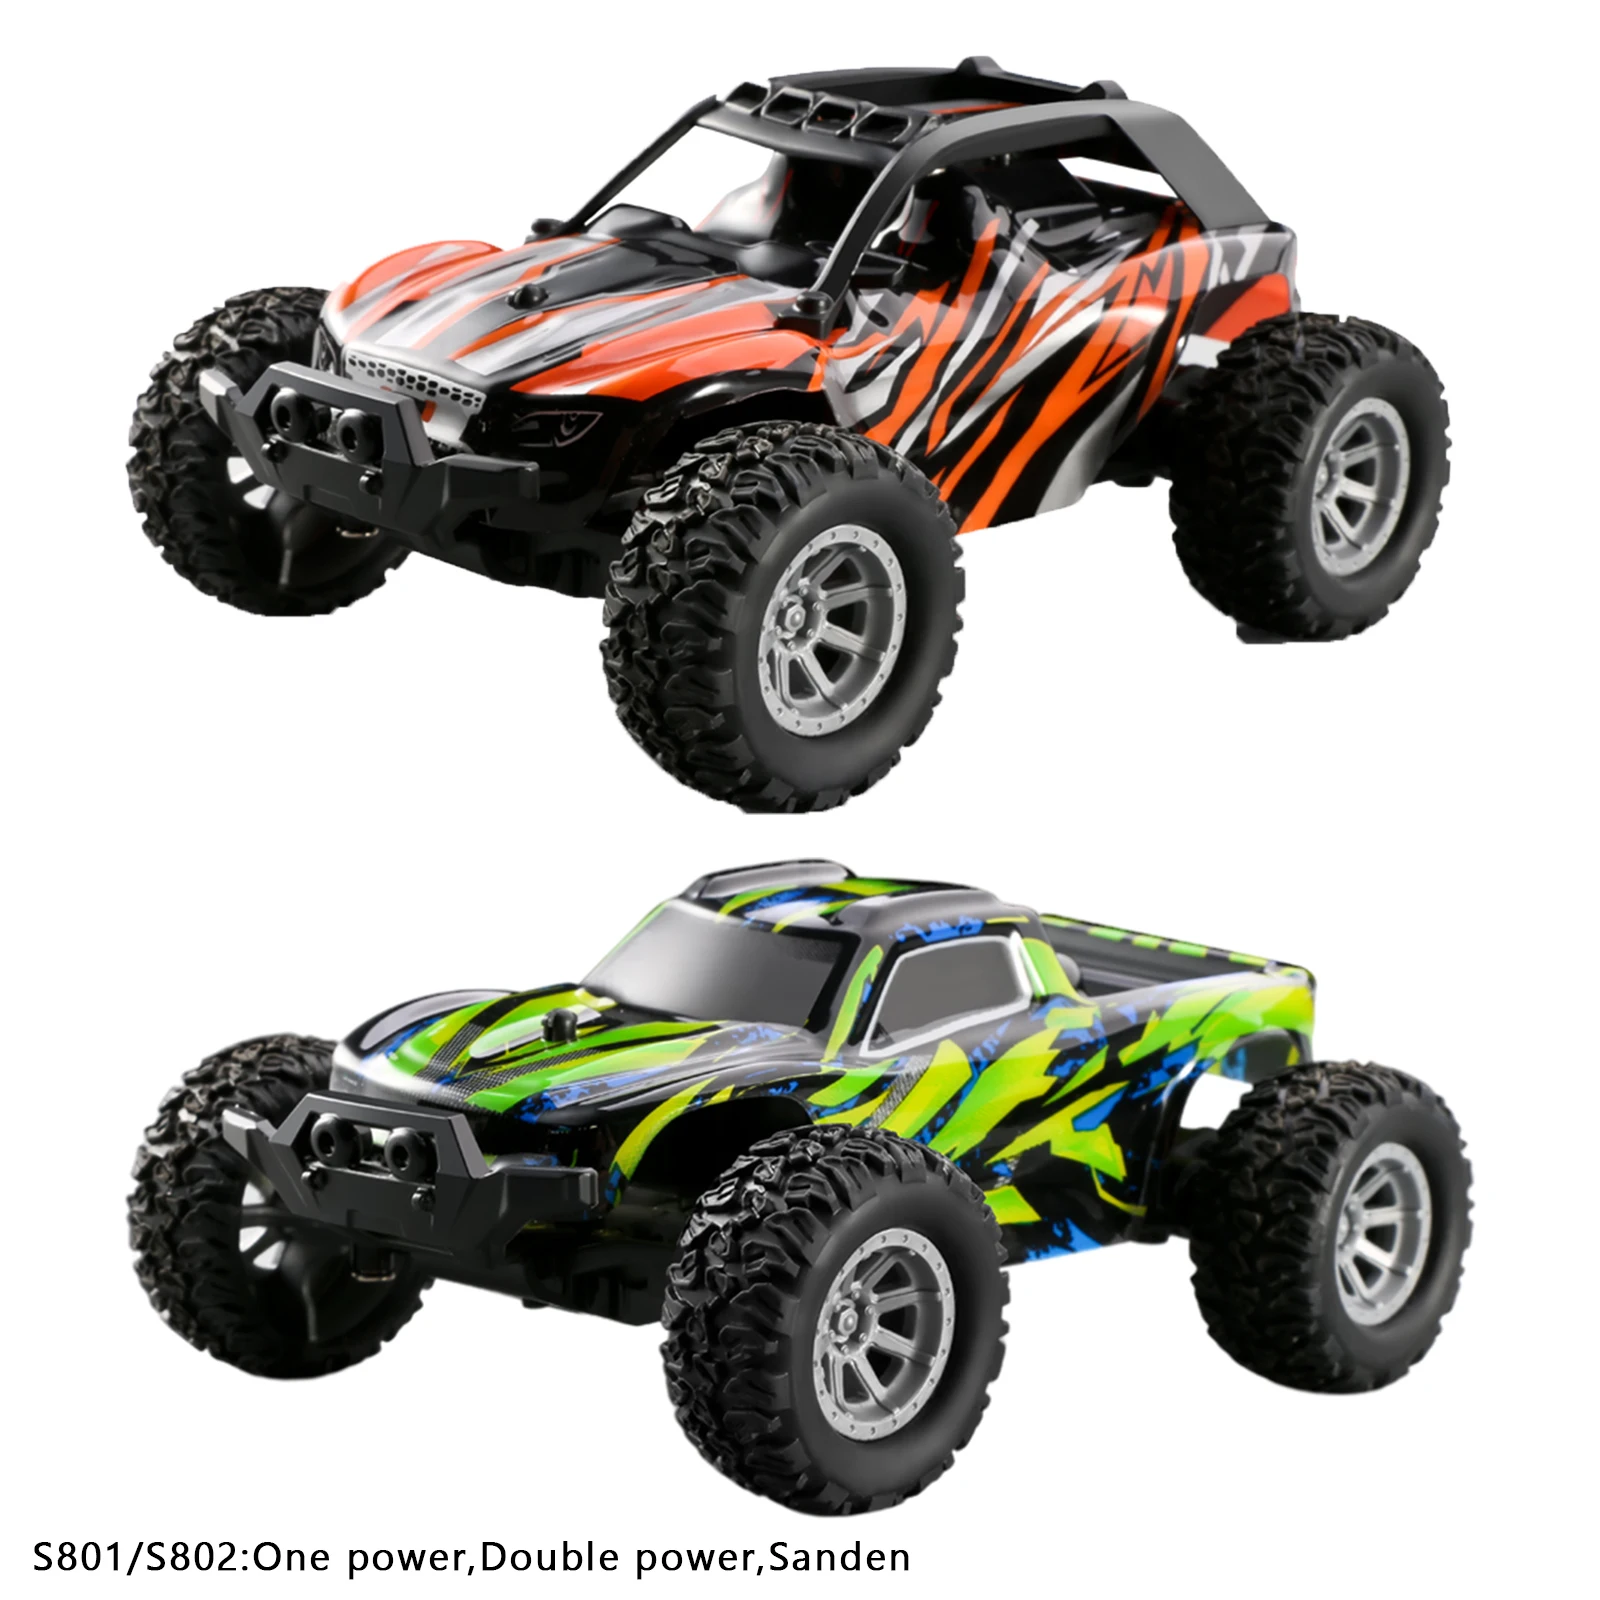 1:32 Scale Remote Control Car High Speed 20 Km/h Electric Toy for Kids Boys Girls RC Car Toys Gift